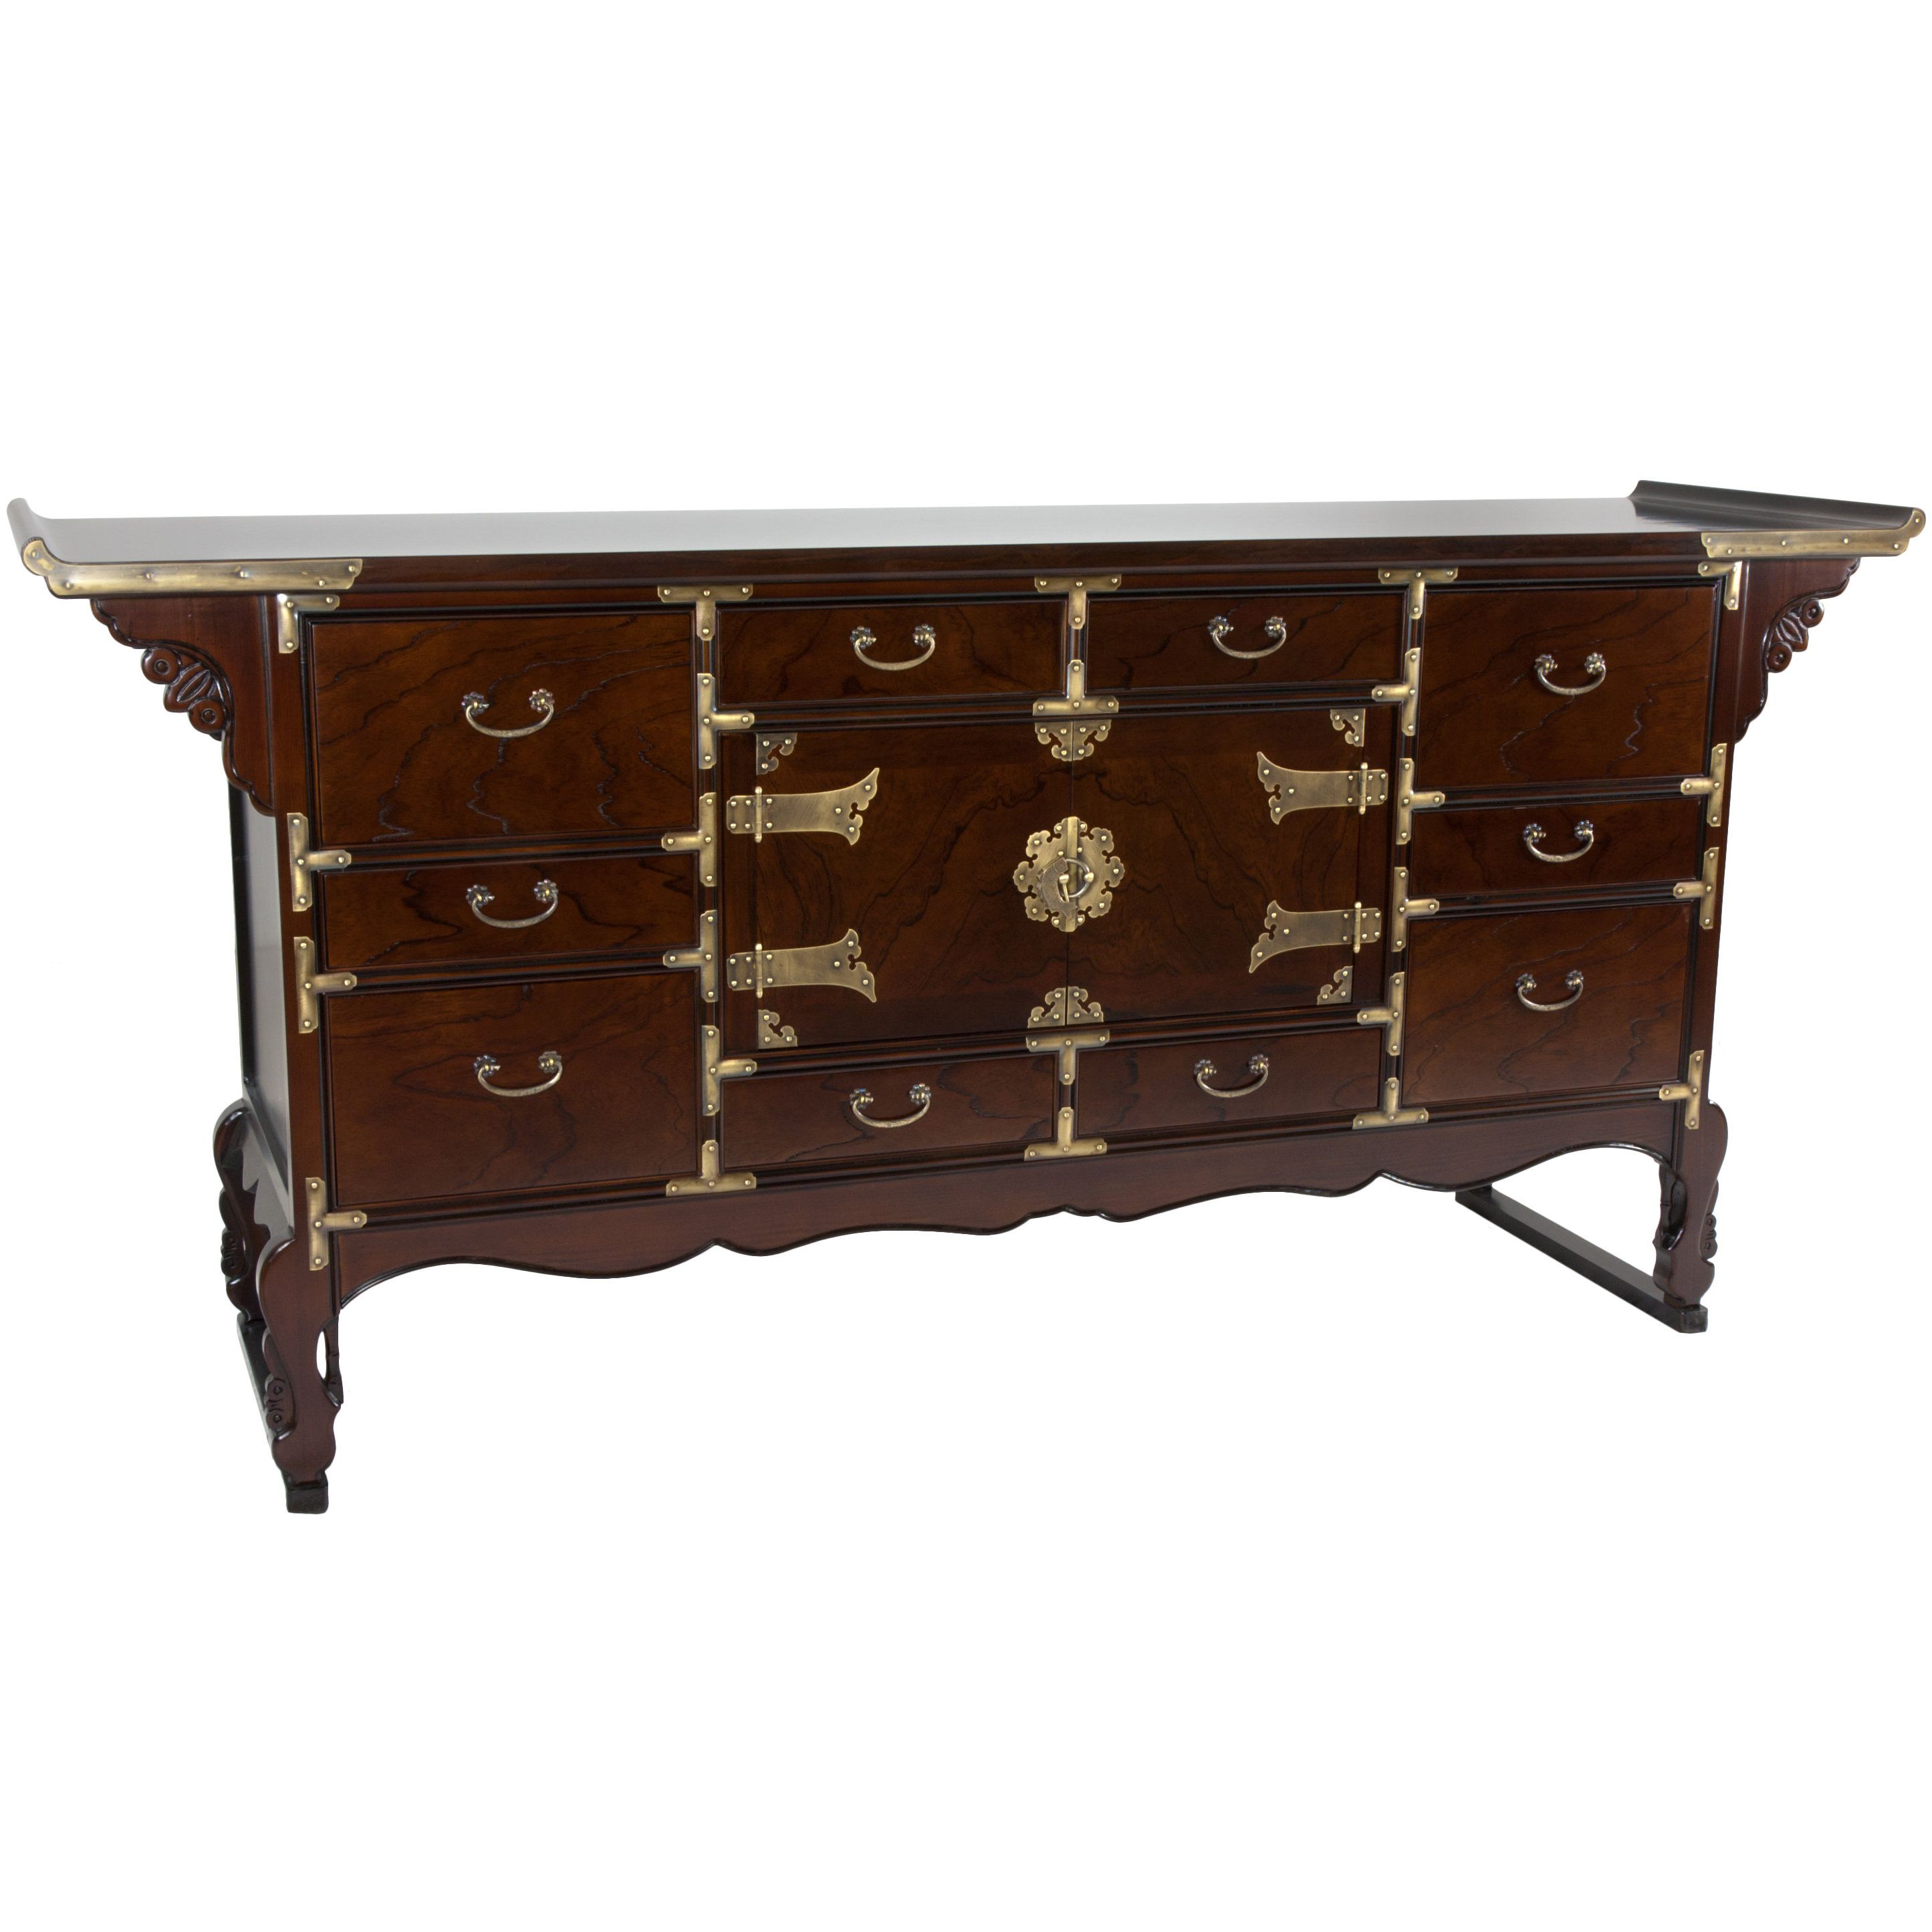 Bronze Sideboard / Credenza Sideboards & Buffets You'll Love Regarding Chaffins Sideboards (View 8 of 30)